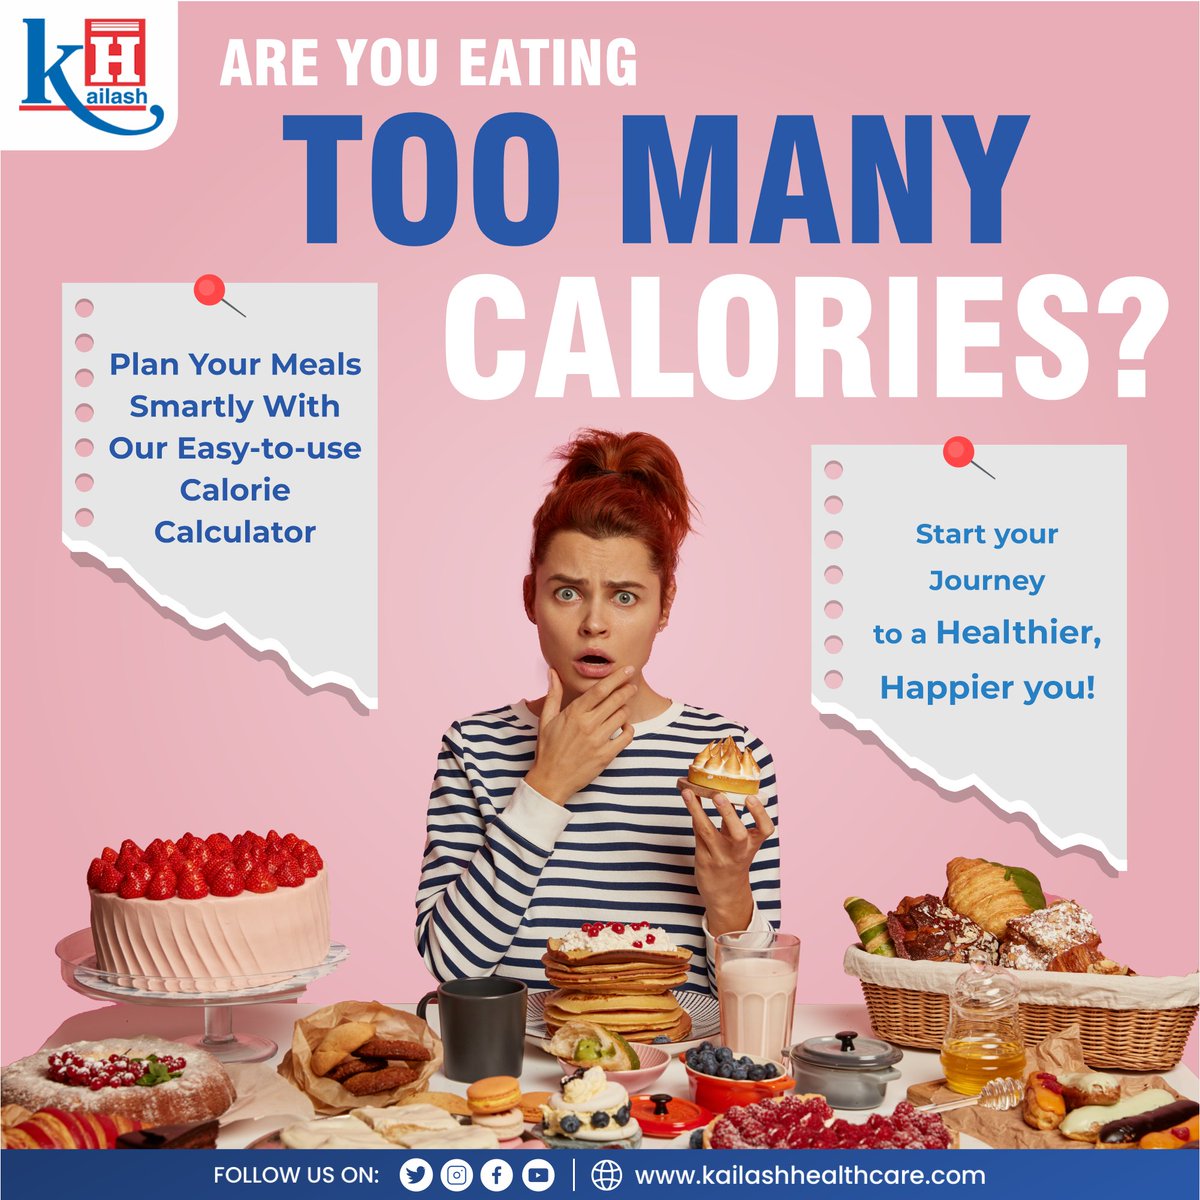 Are you taking up too many calories? Plan your meals smartly with our easy-to use calorie calculator: kailashhealthcare.com/Service/Calori…